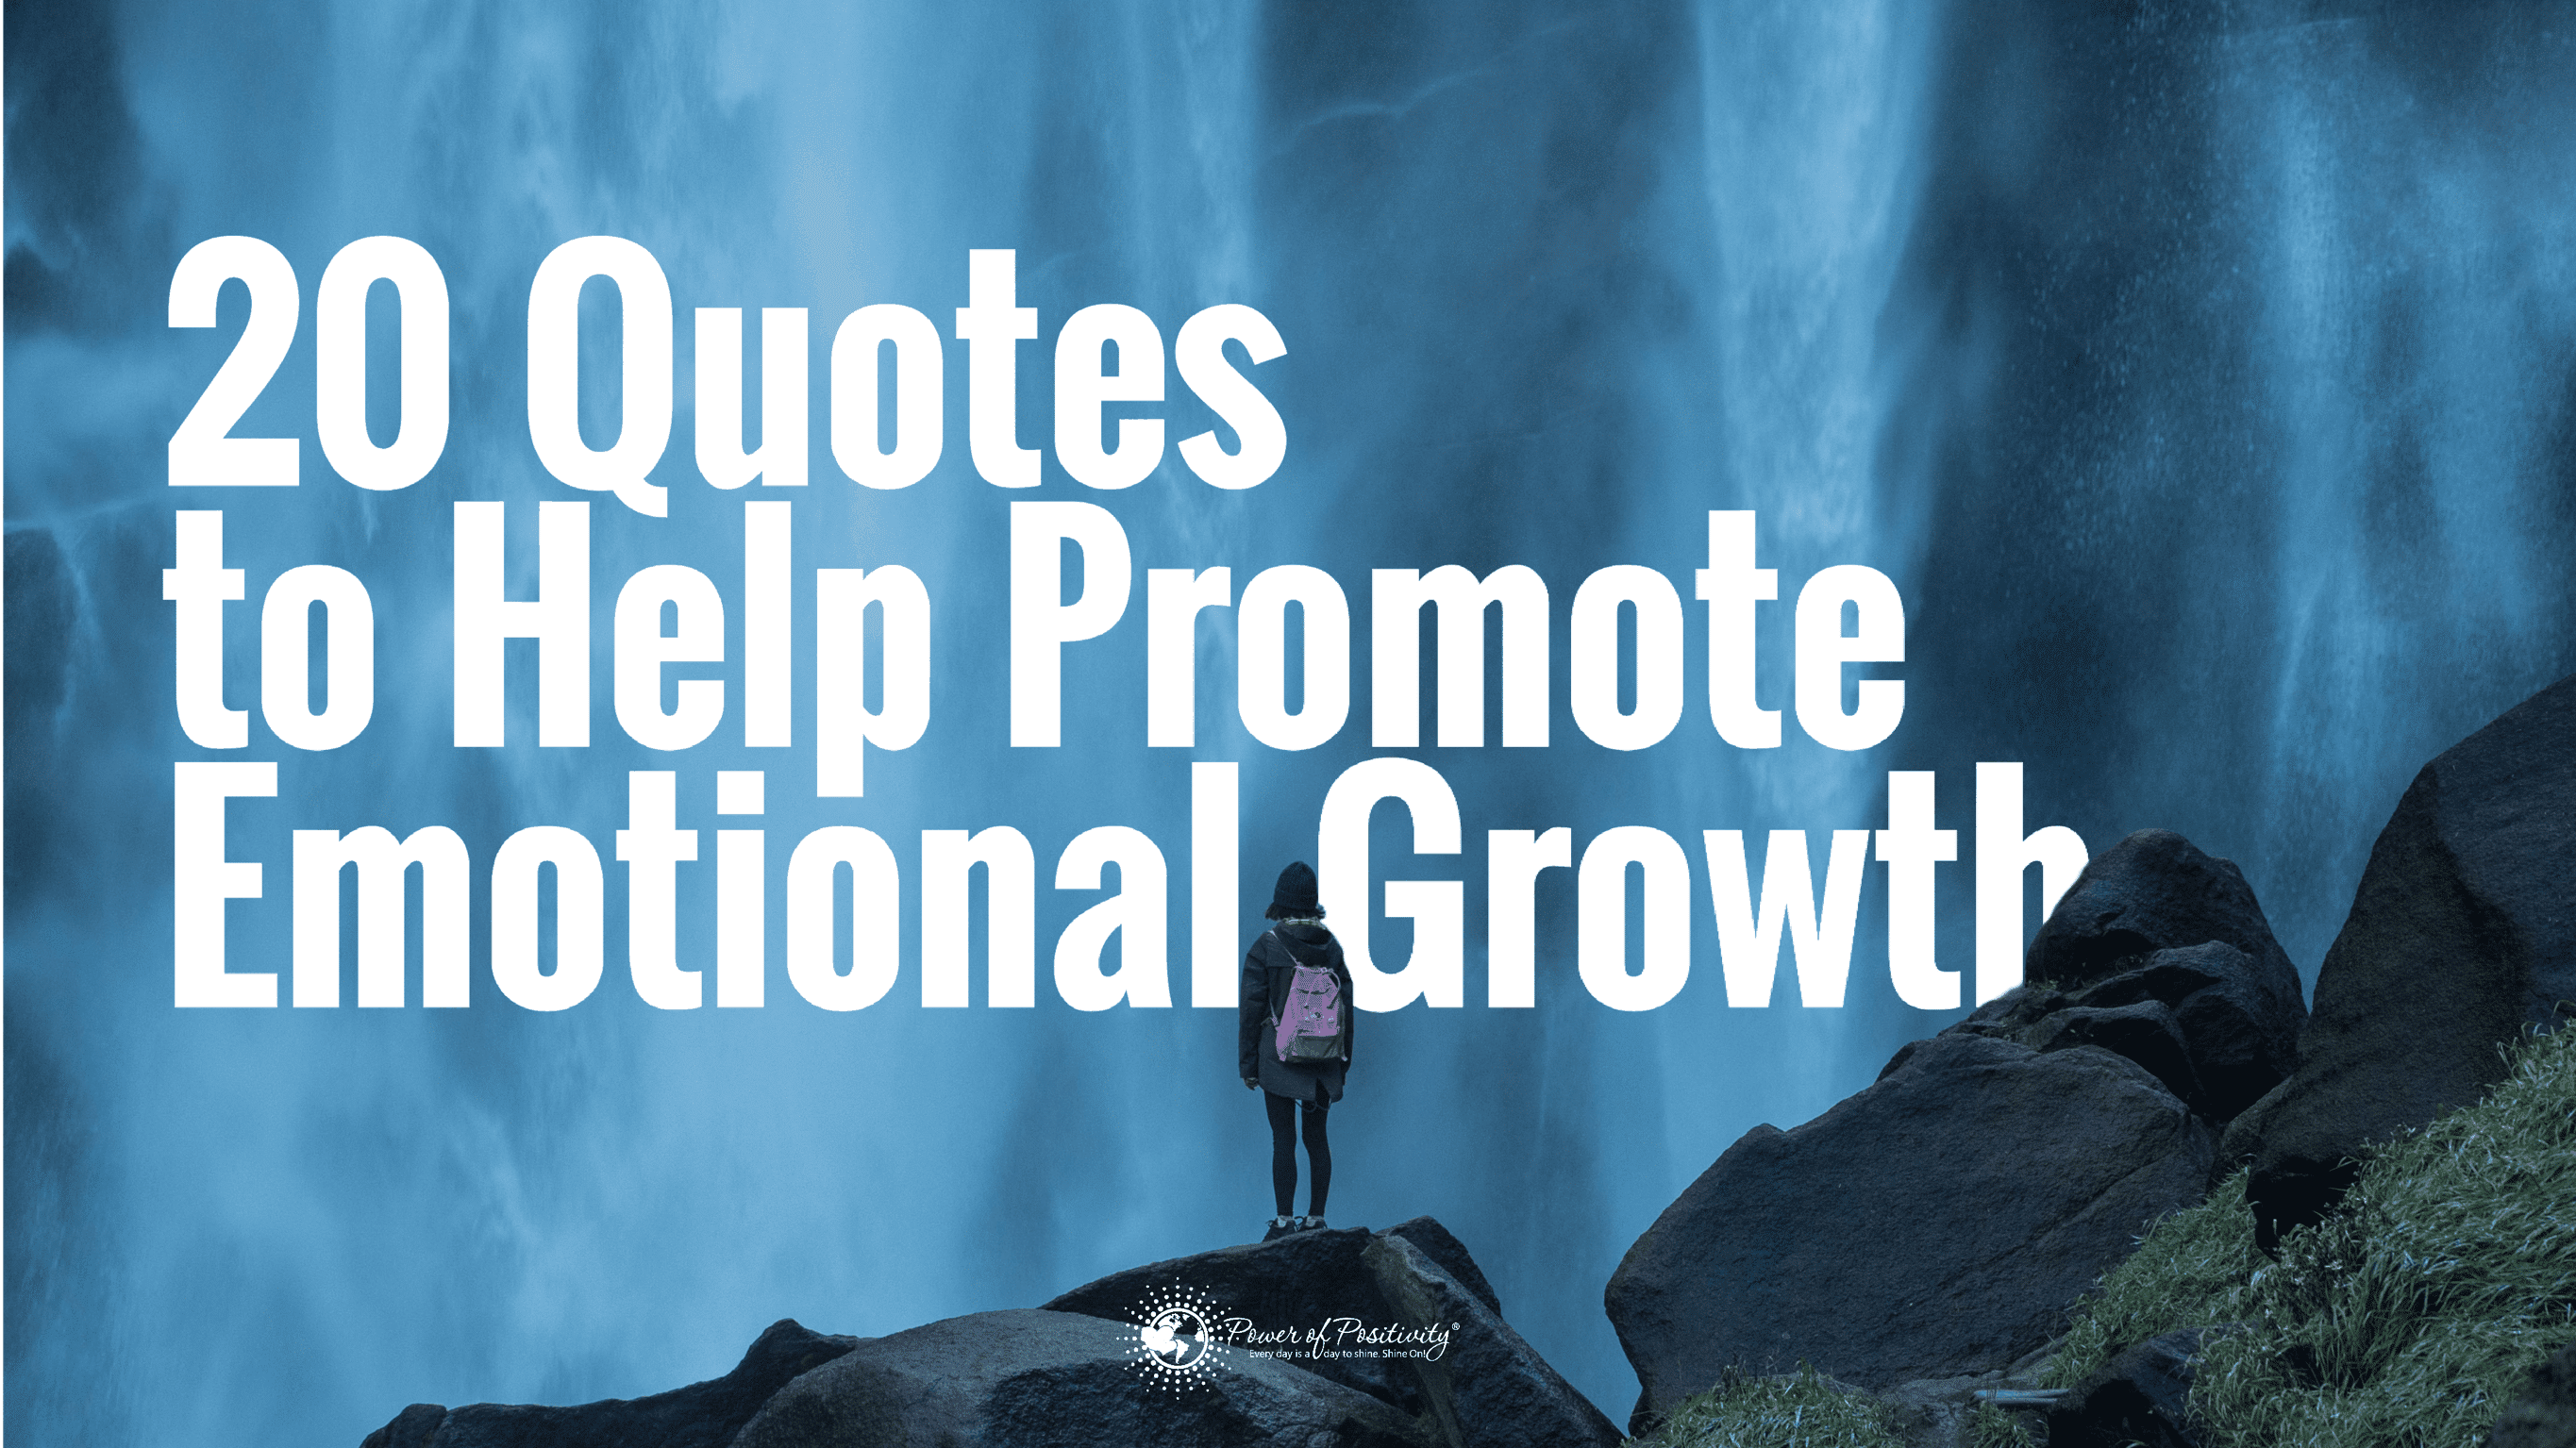 20 Quotes to Help Promote Emotional Growth